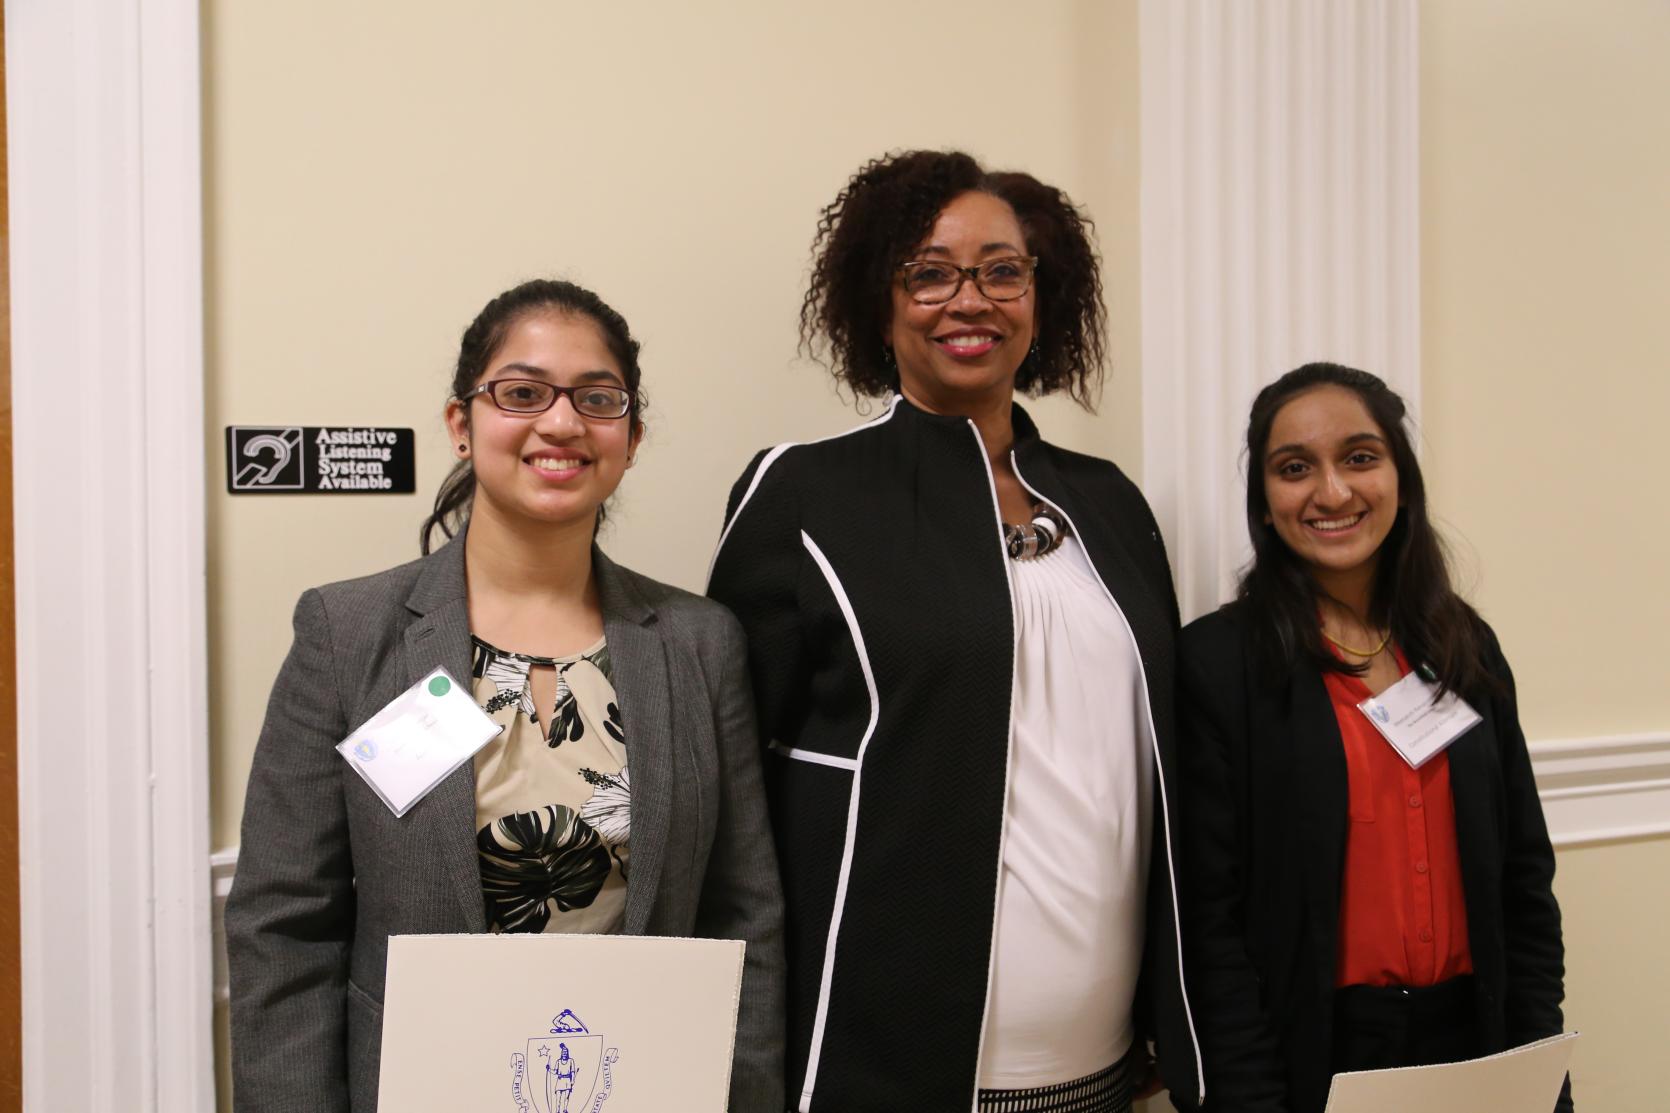 Deputy Auditor Pamela Lomax presented citations to Shreya Kumar and Meenakshi Ramakrishnan of the Bromfield School, for their participation in the 72nd annual Student Government Day at the Massachusetts State House.